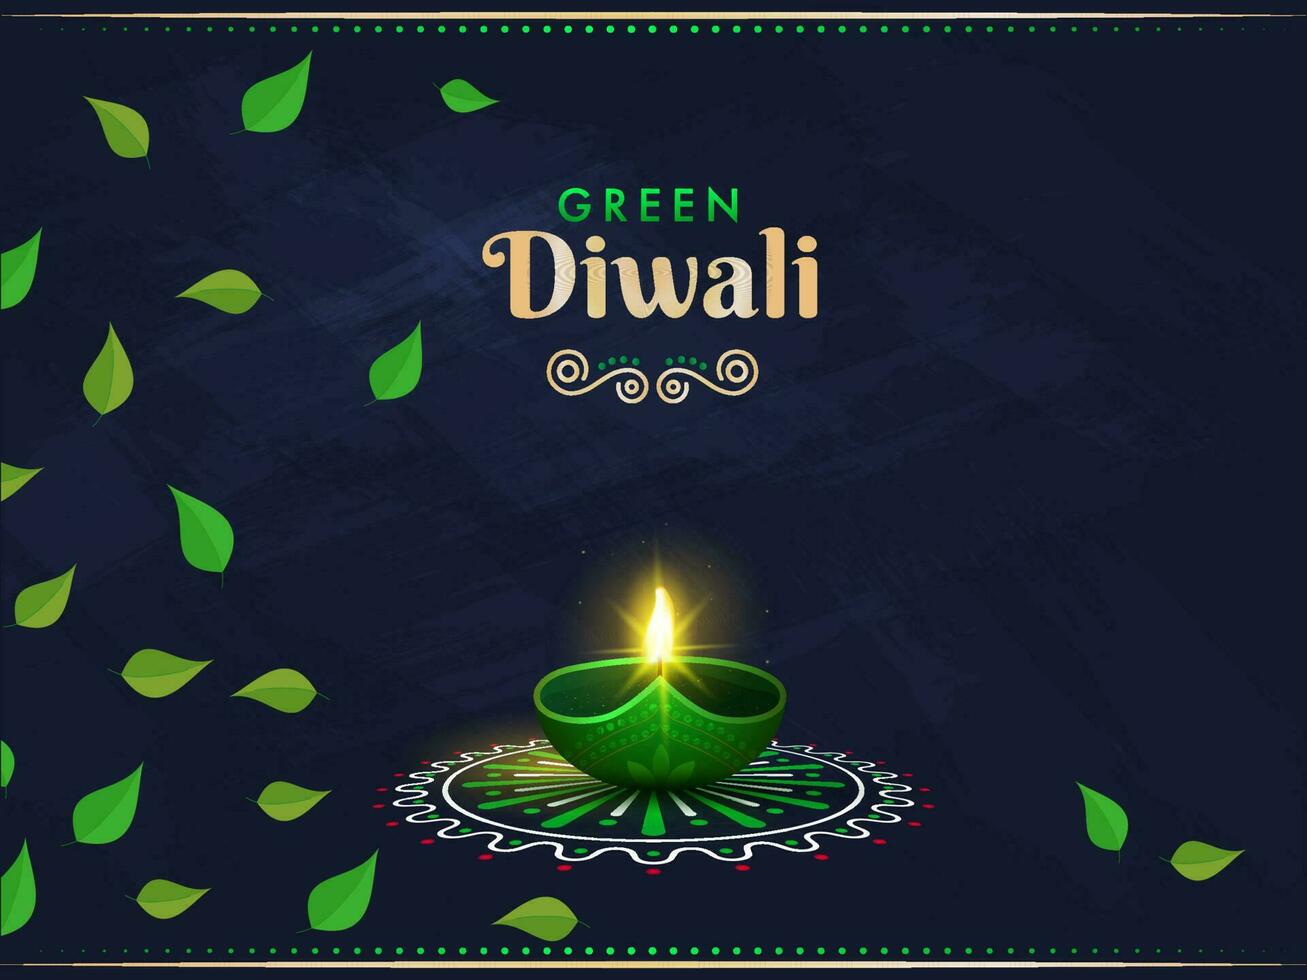 Green Diwali Concept With Illuminated Oil Lamp Over Rangoli And Leaves Decorated On Blue Texture Background. vector